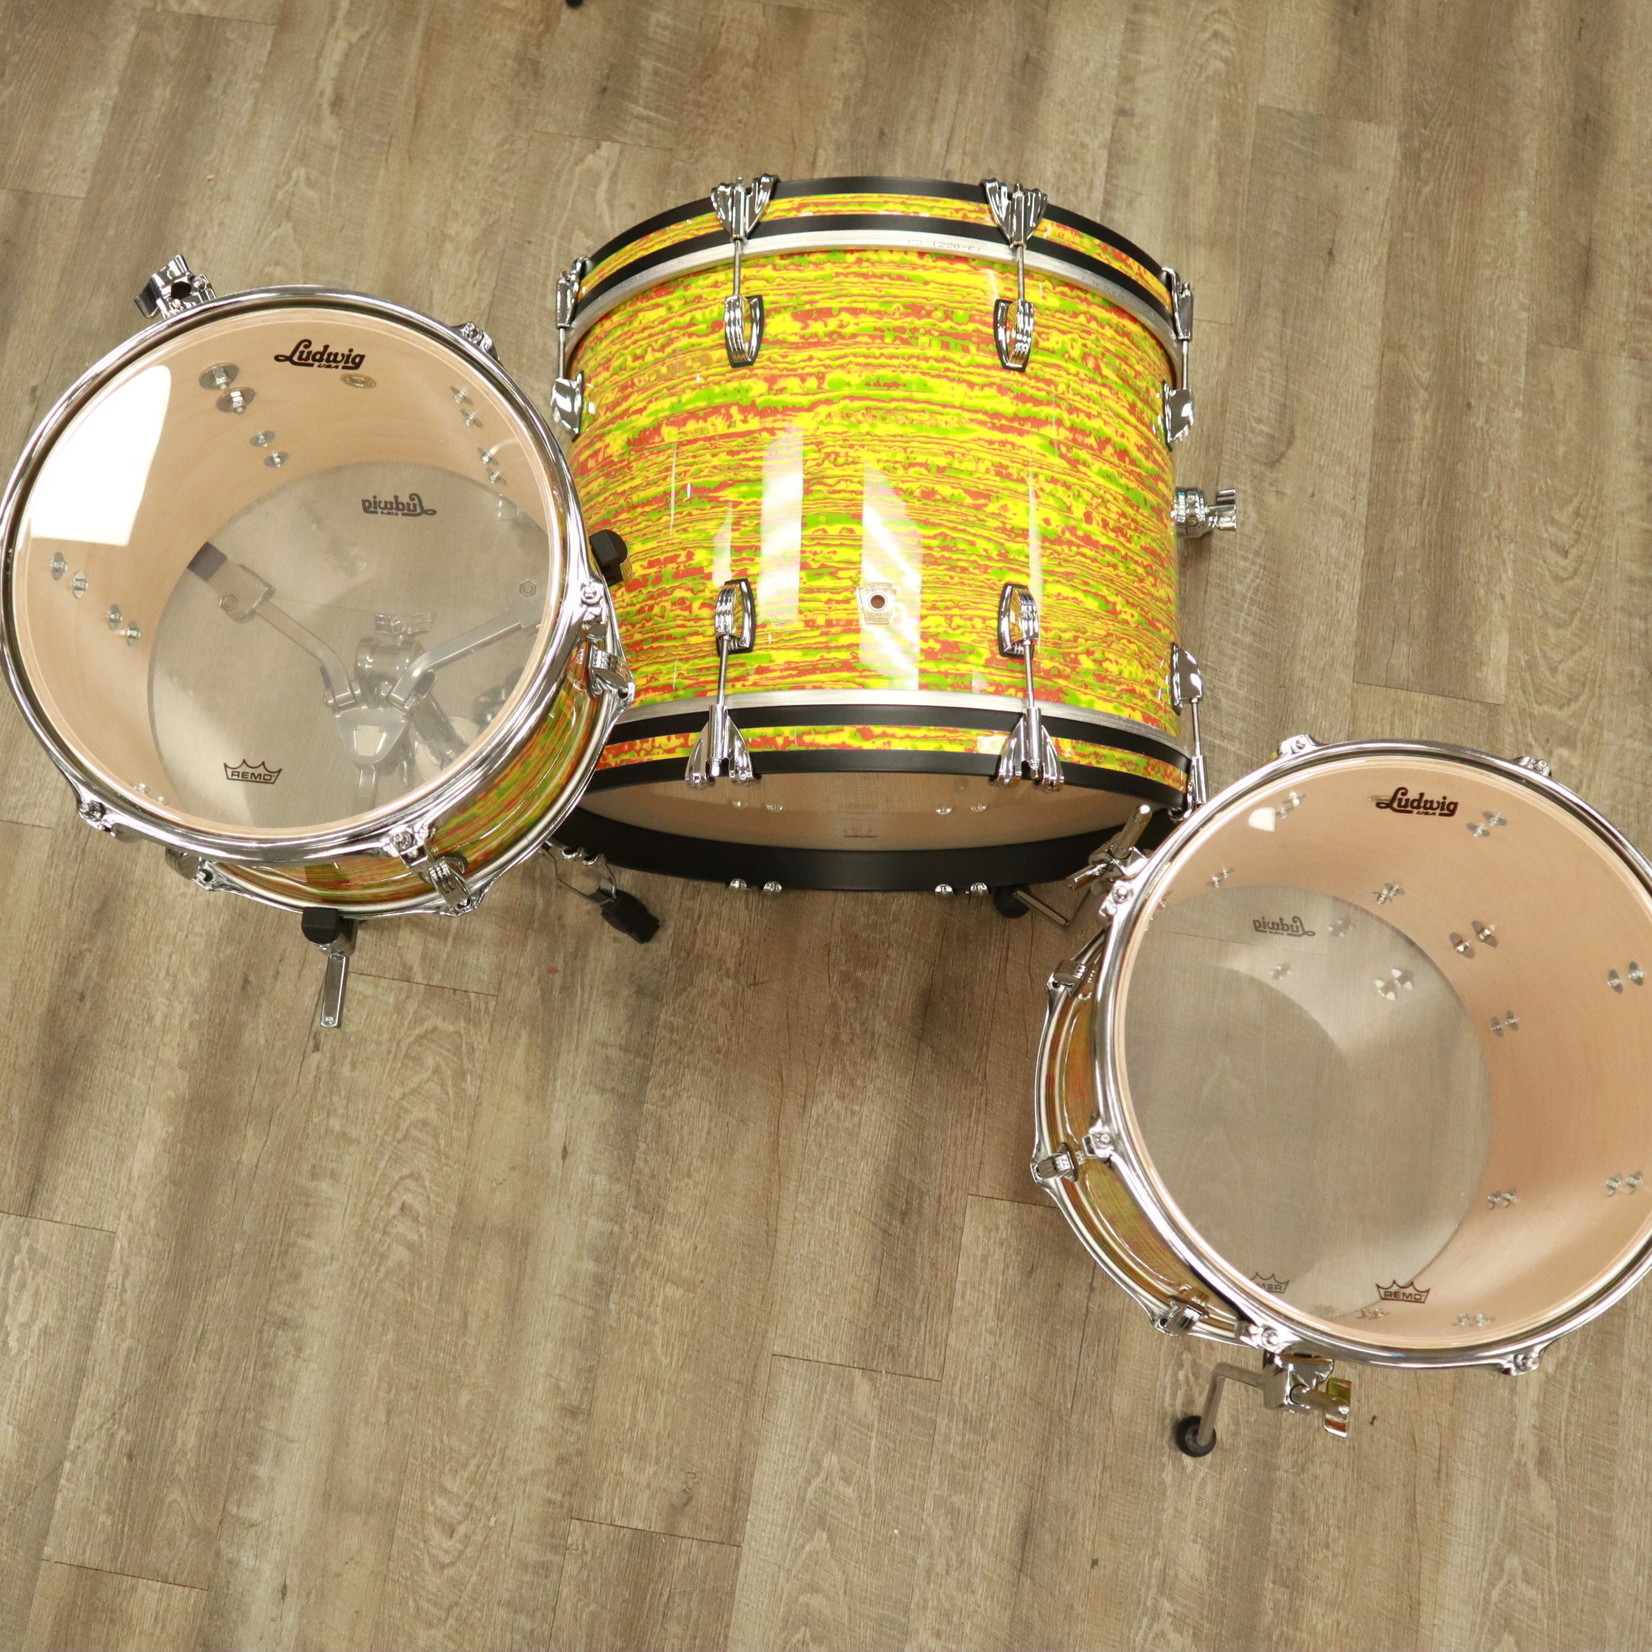 Ludwig Ludwig Classic Maple Downbeat 3-Pc Shell Pack 12/14/20 (Citrus Mod)